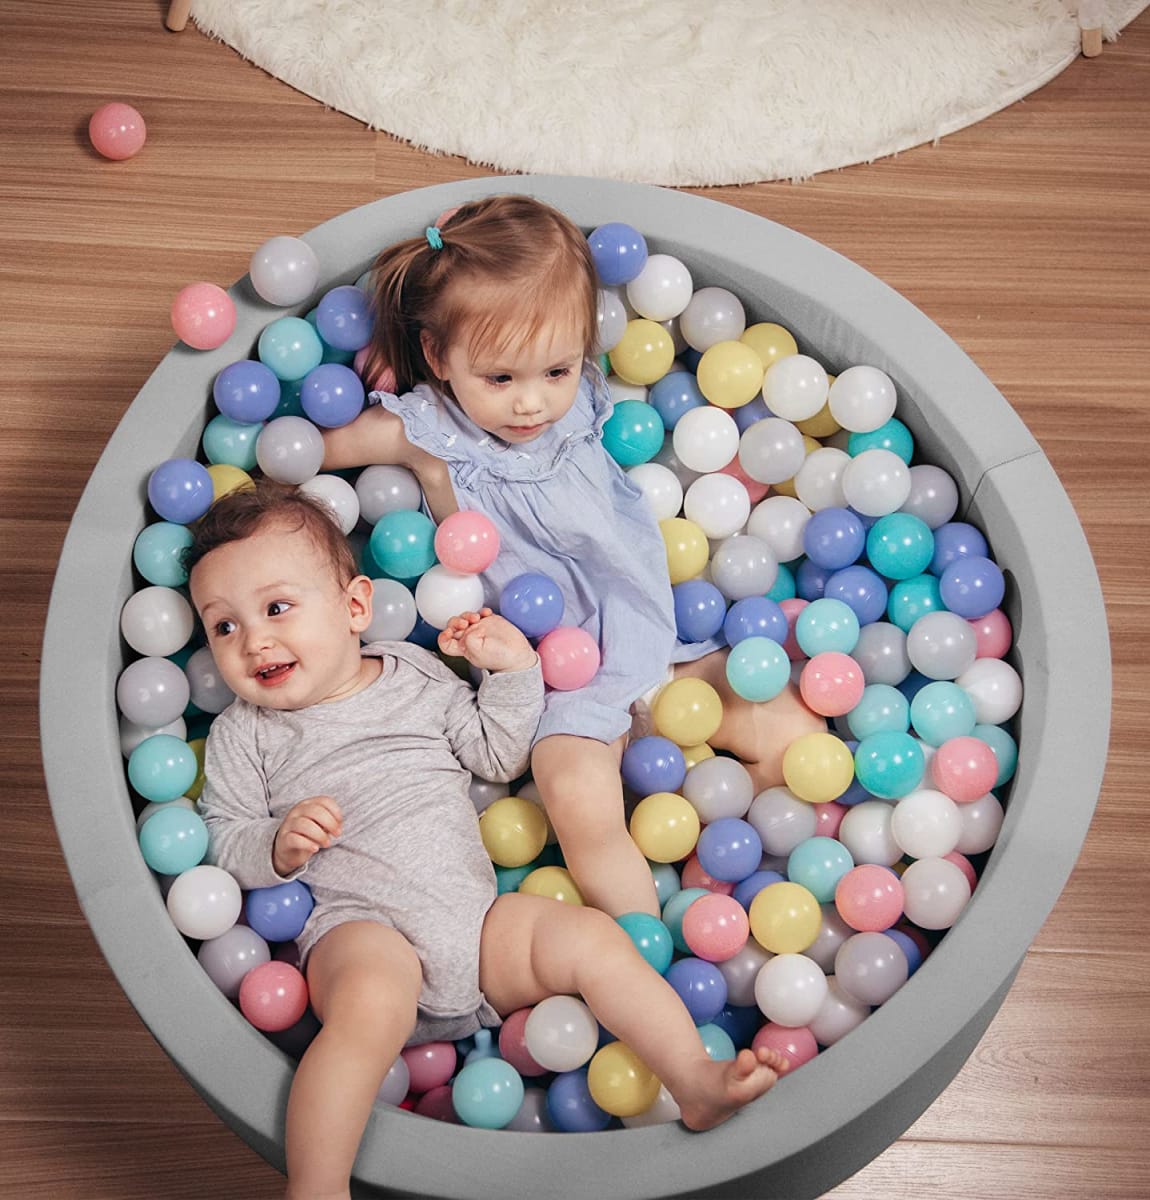 Foam Ball Pit for Children Toddlers,Baby Playpen Ball Pool Soft Round Designed Easy to Clean or Install,Ideal Gift for Babies Infants Indoor and Outdoor Game